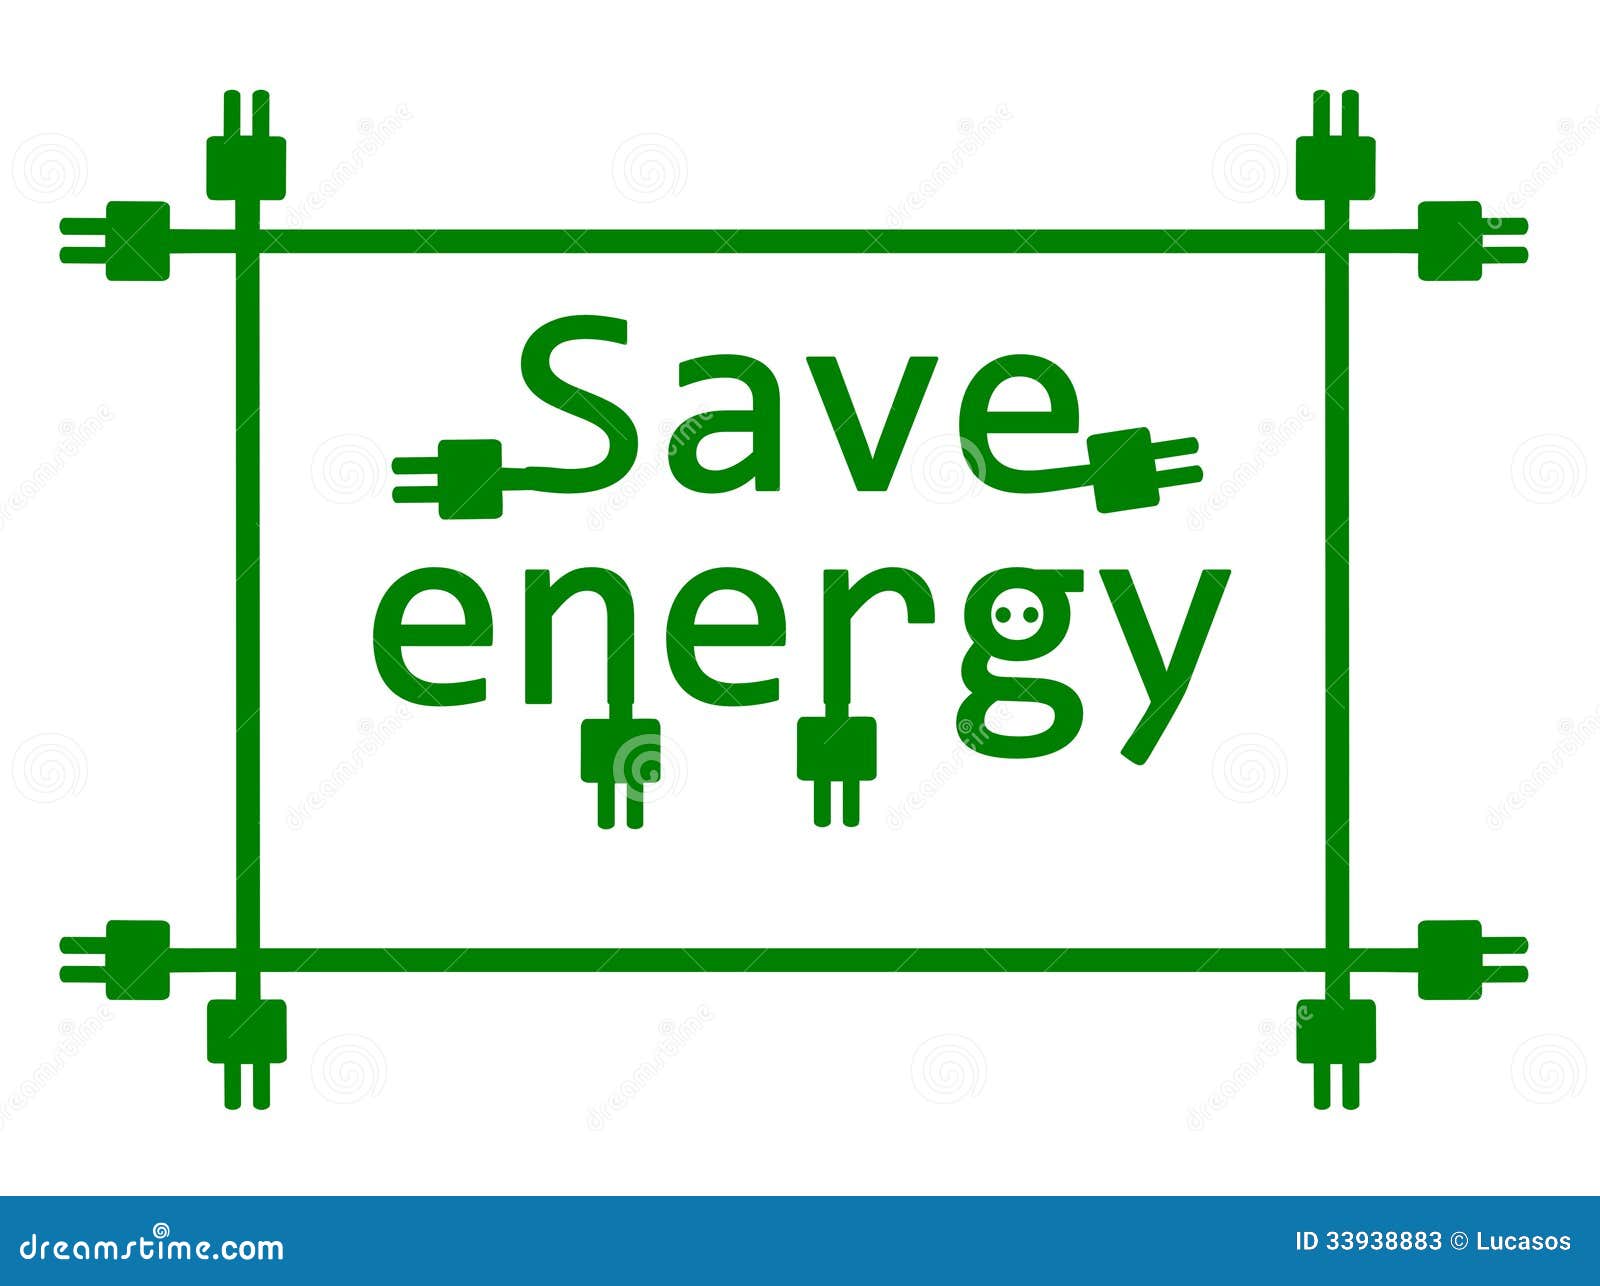 clipart on save electricity - photo #50